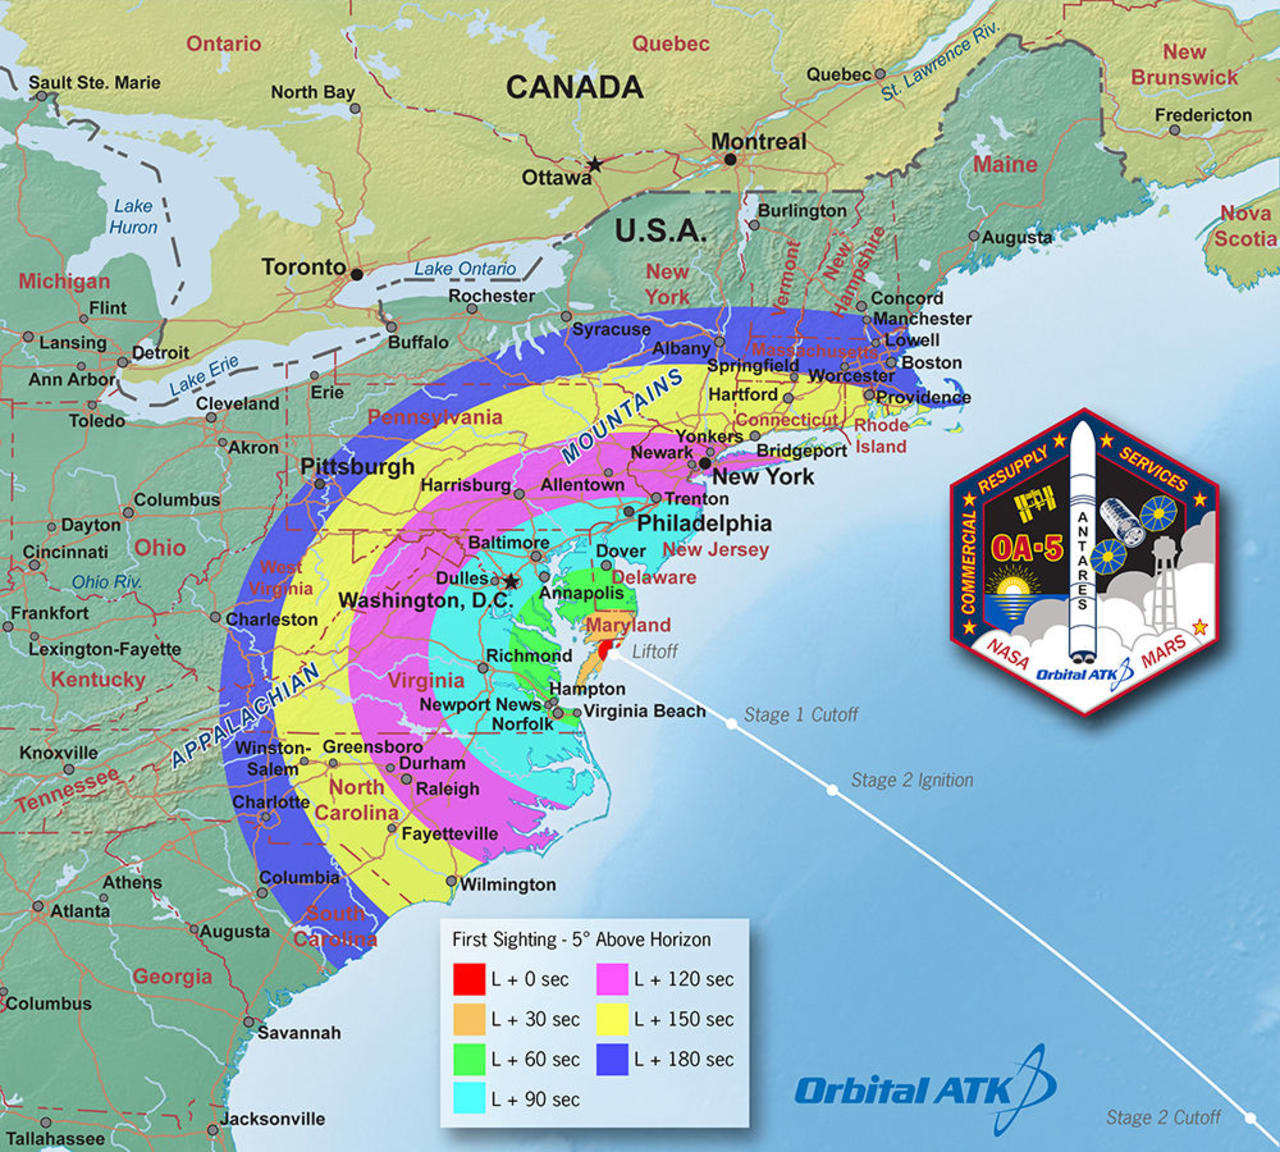 This map shows the regions of visibility for the nighttime launch scheduled for 8:03 p.m. on Sunday, Oct. 16. The launch may be visible from a wide region of the U.S. East Coast.